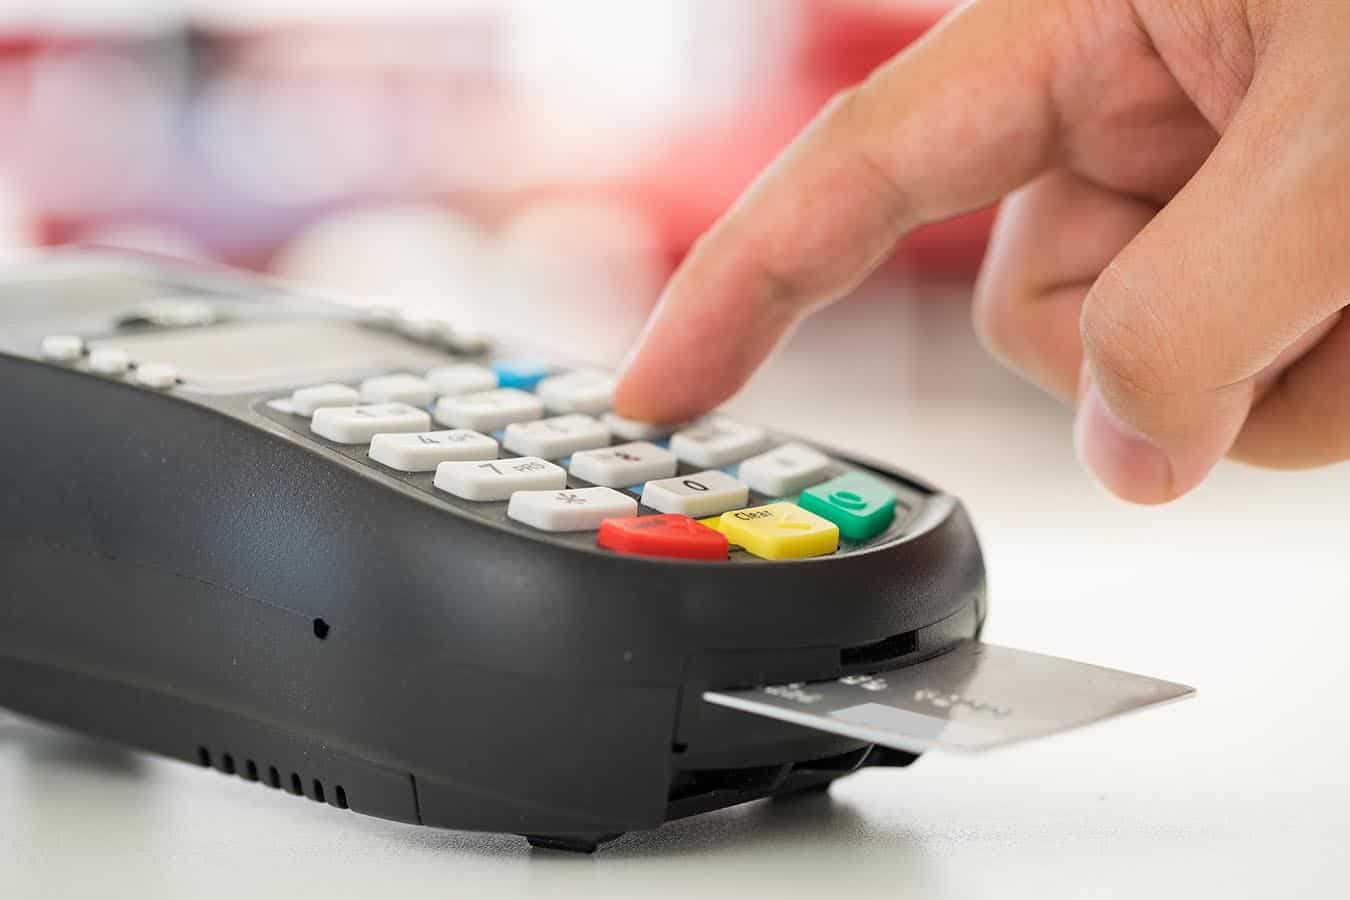 What is PCI DSS and why is it important?